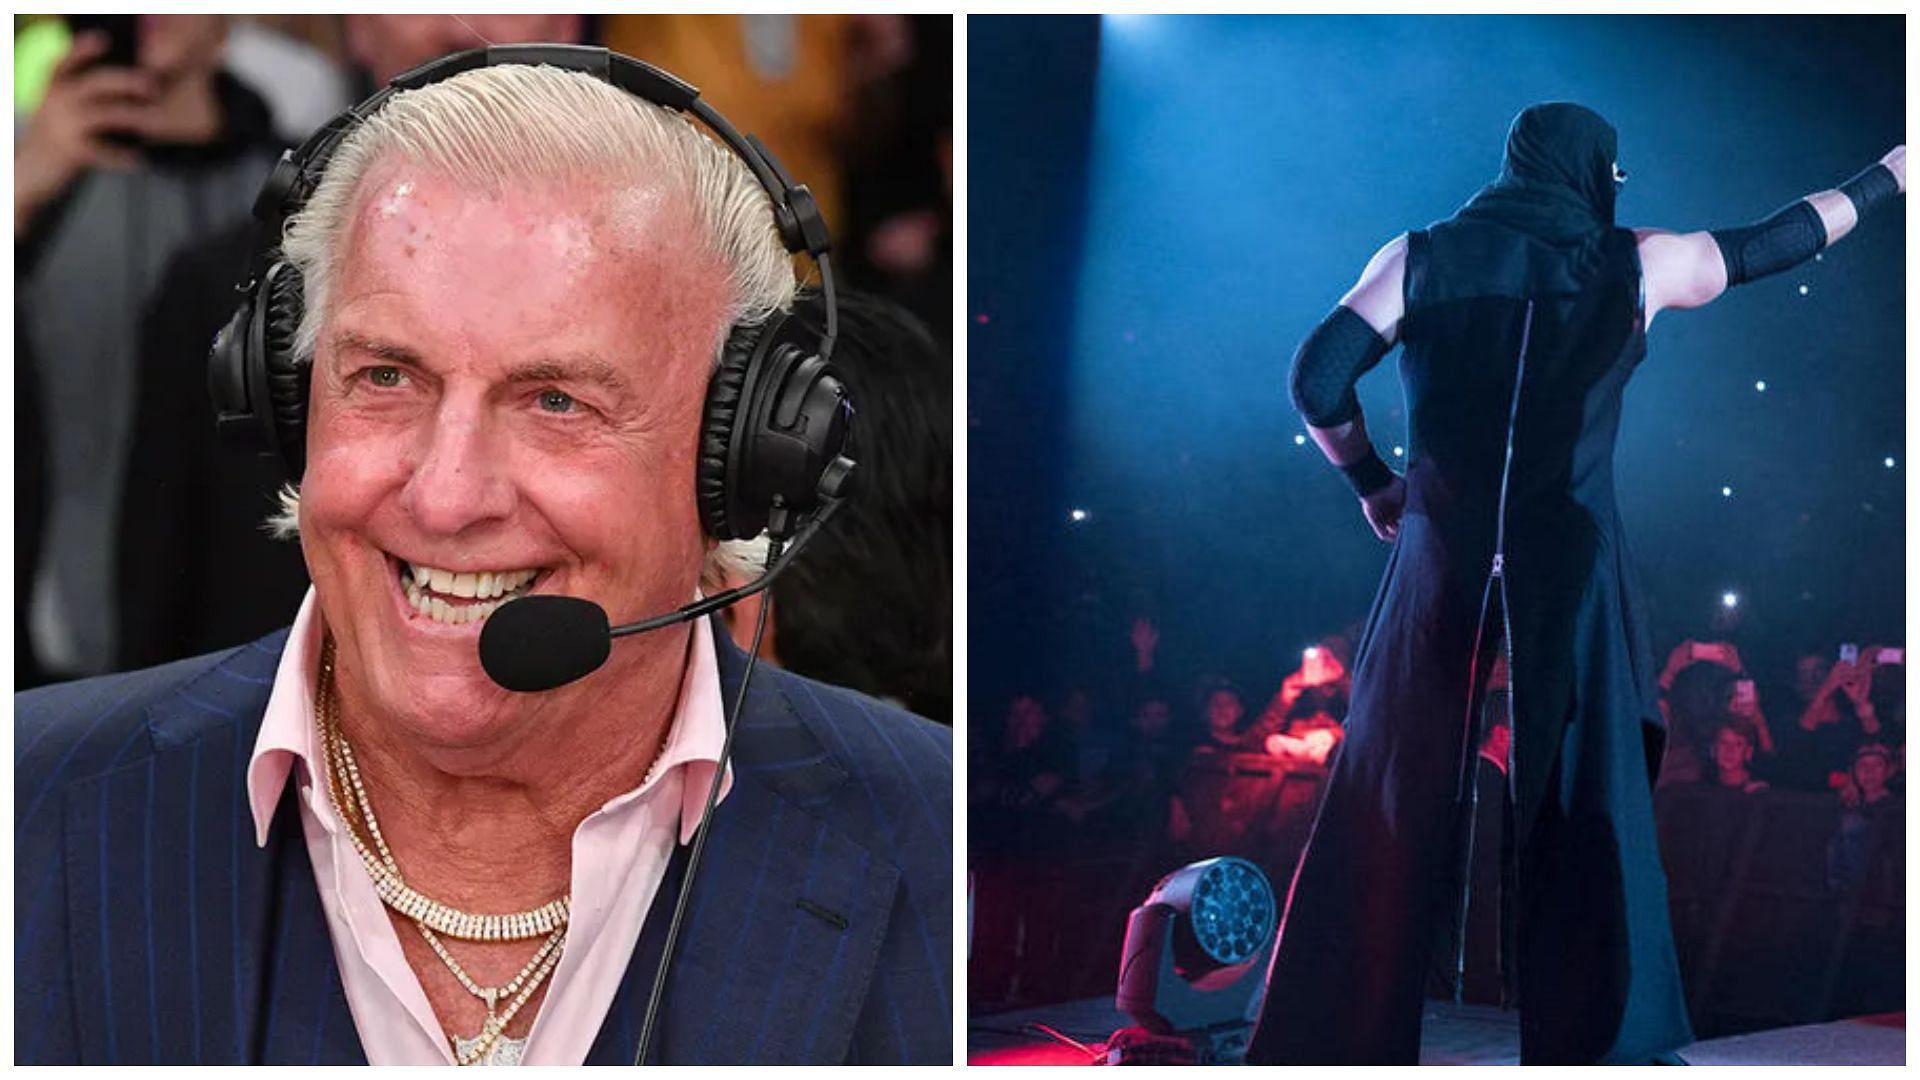 Ric Flair is a 2-time WWE Hall of Famer.